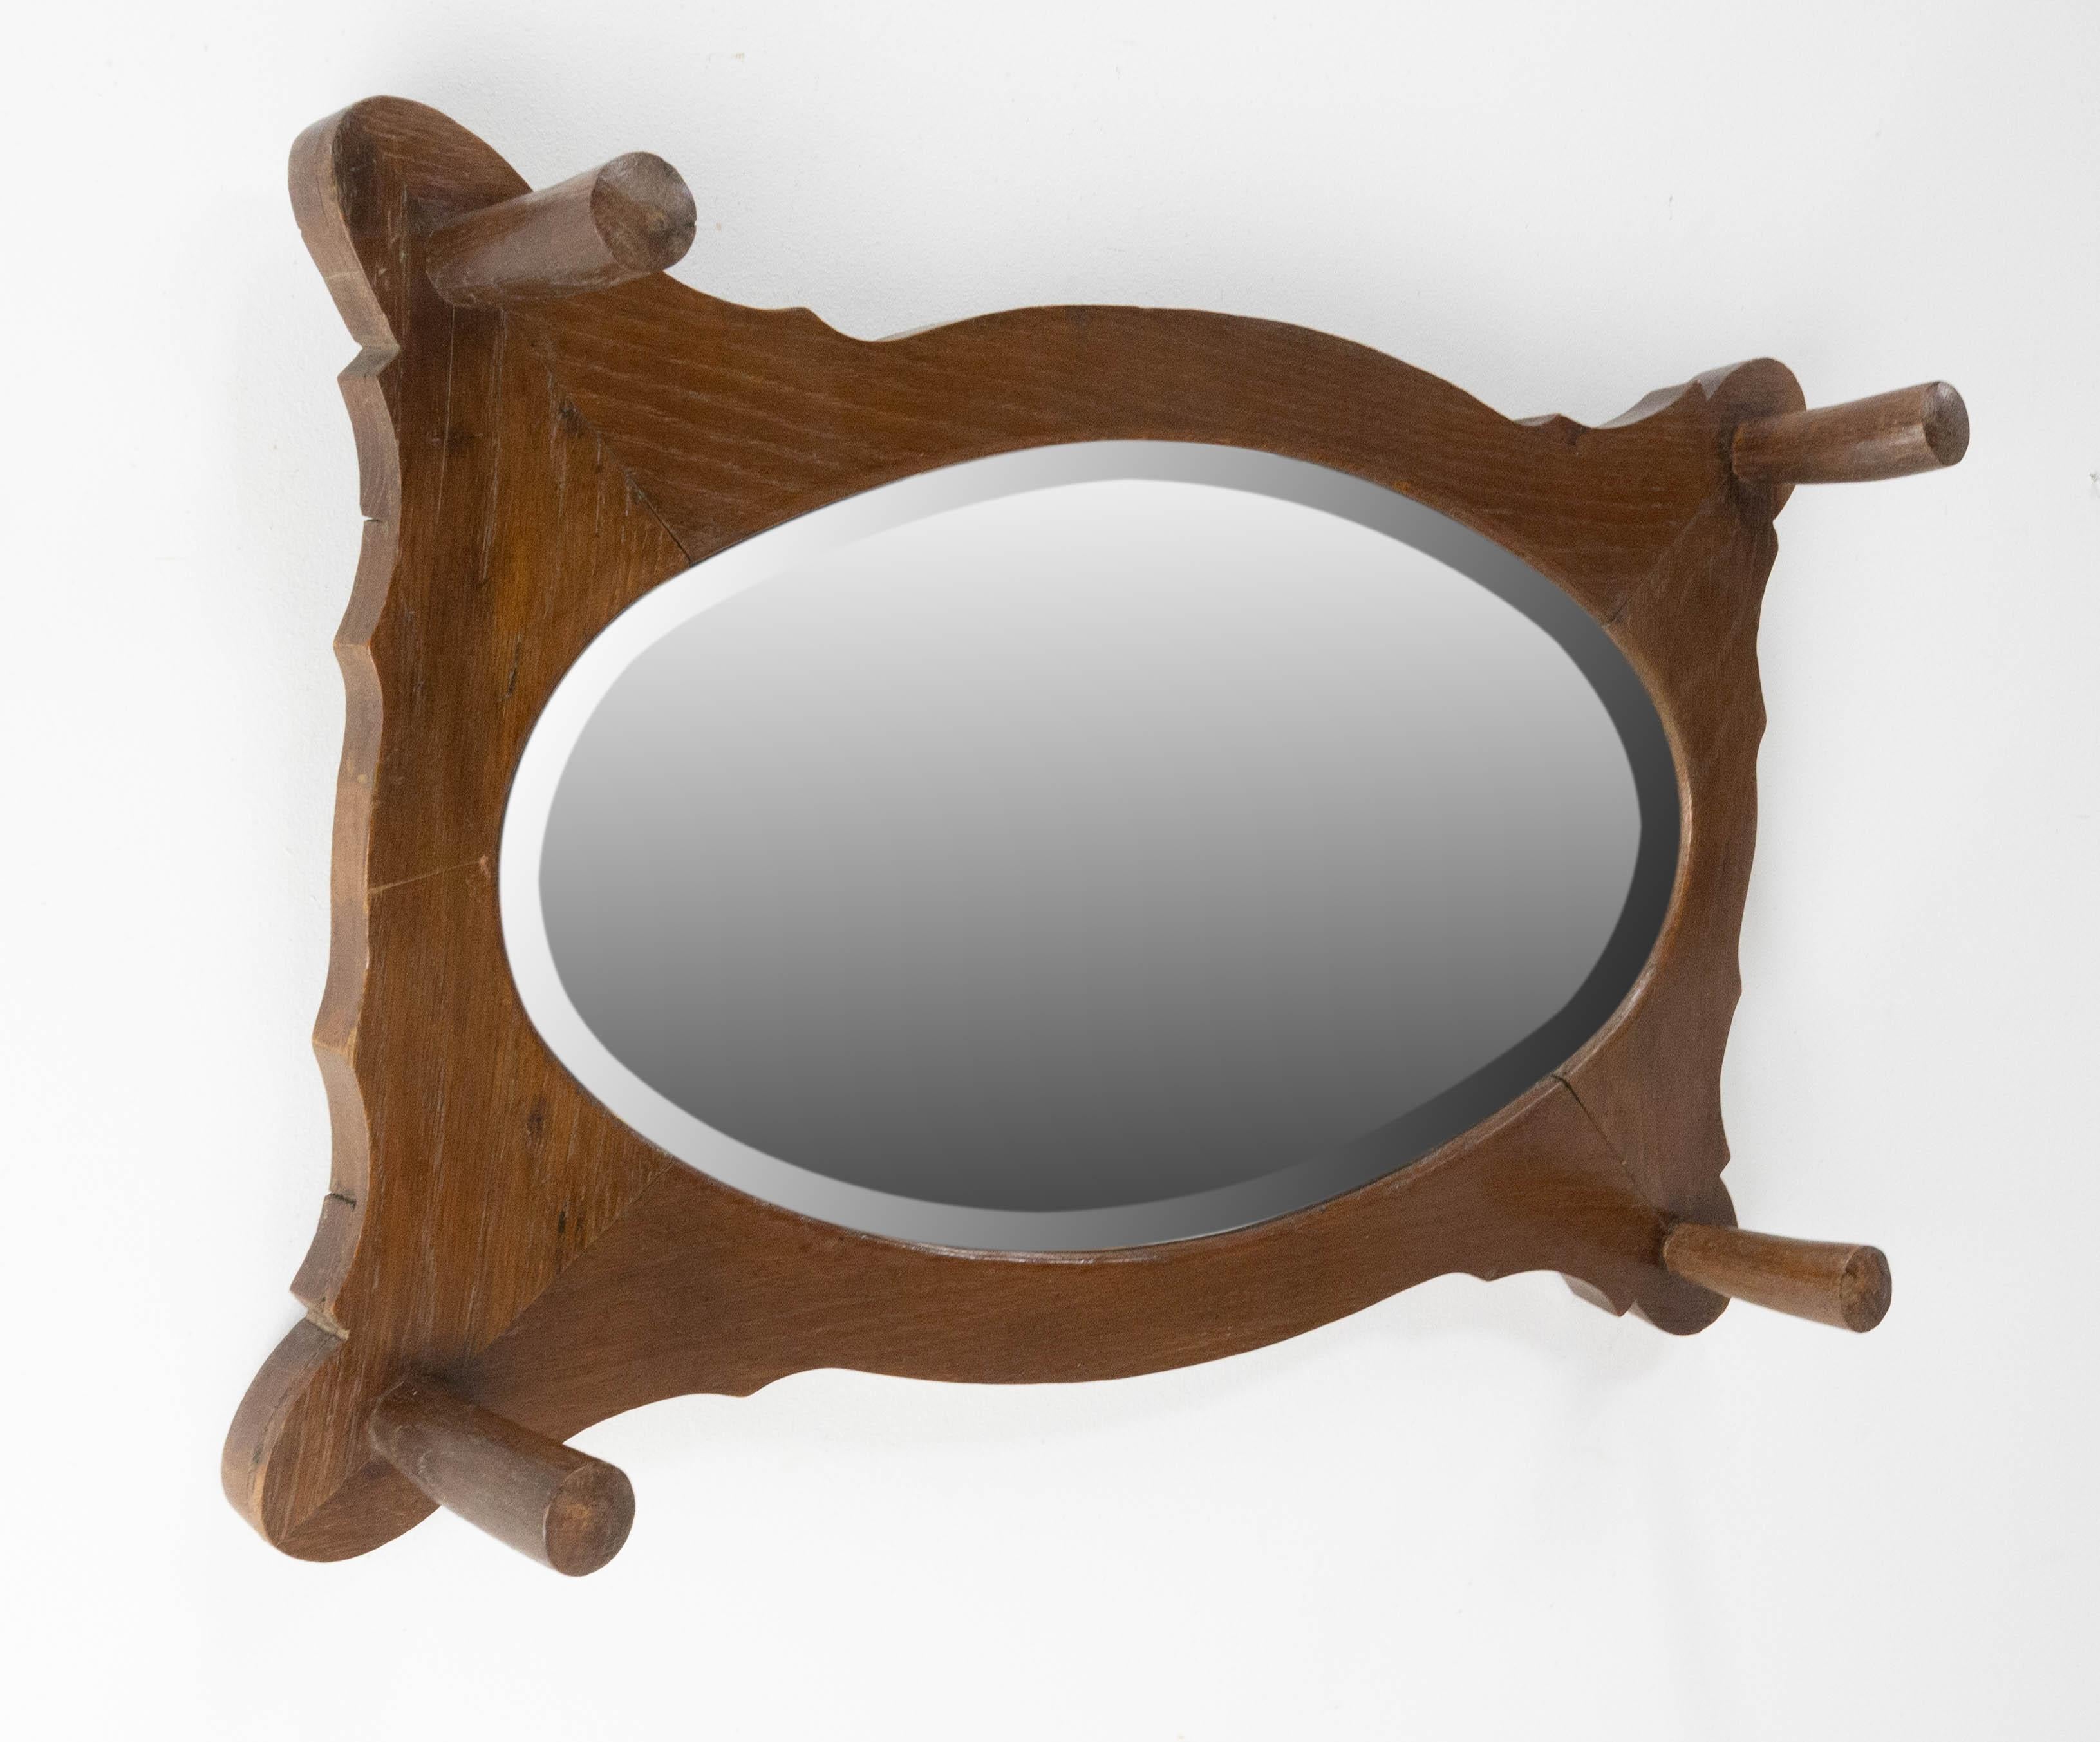 French provincial coat and hat hanger
Massive oak
Oval beveled mirror
Made circa 1920.

Shipping:
L 75 P 15 H 45 5.8 kg.